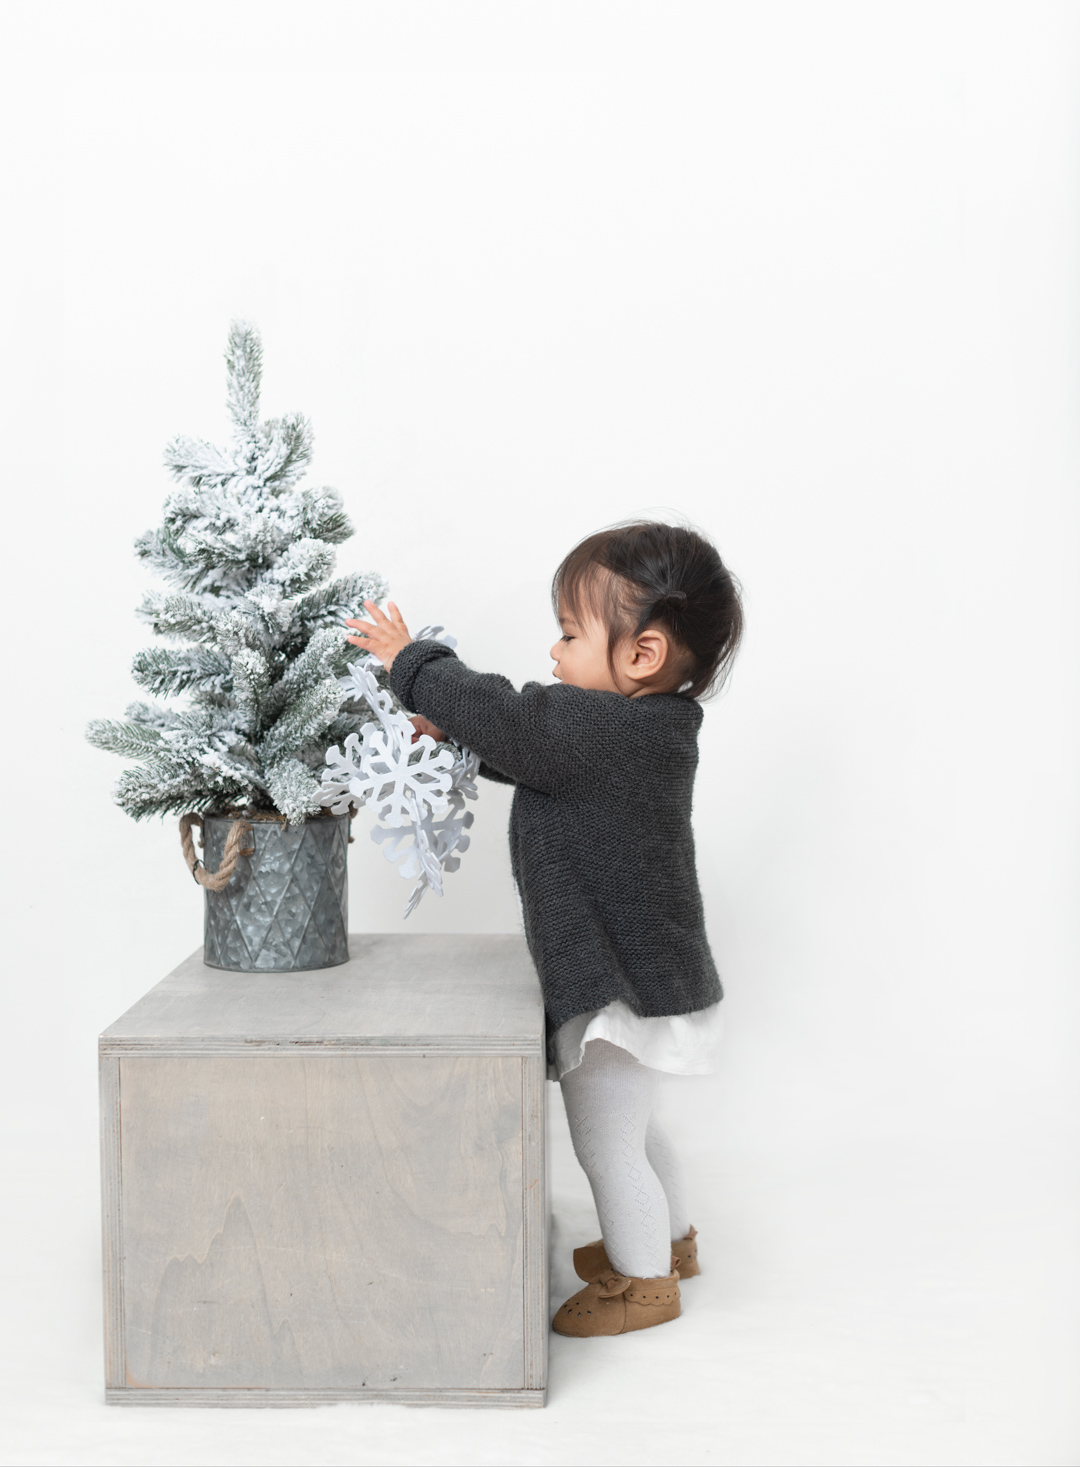 kids decorating christmas tree in Vancouver BC photoshoot